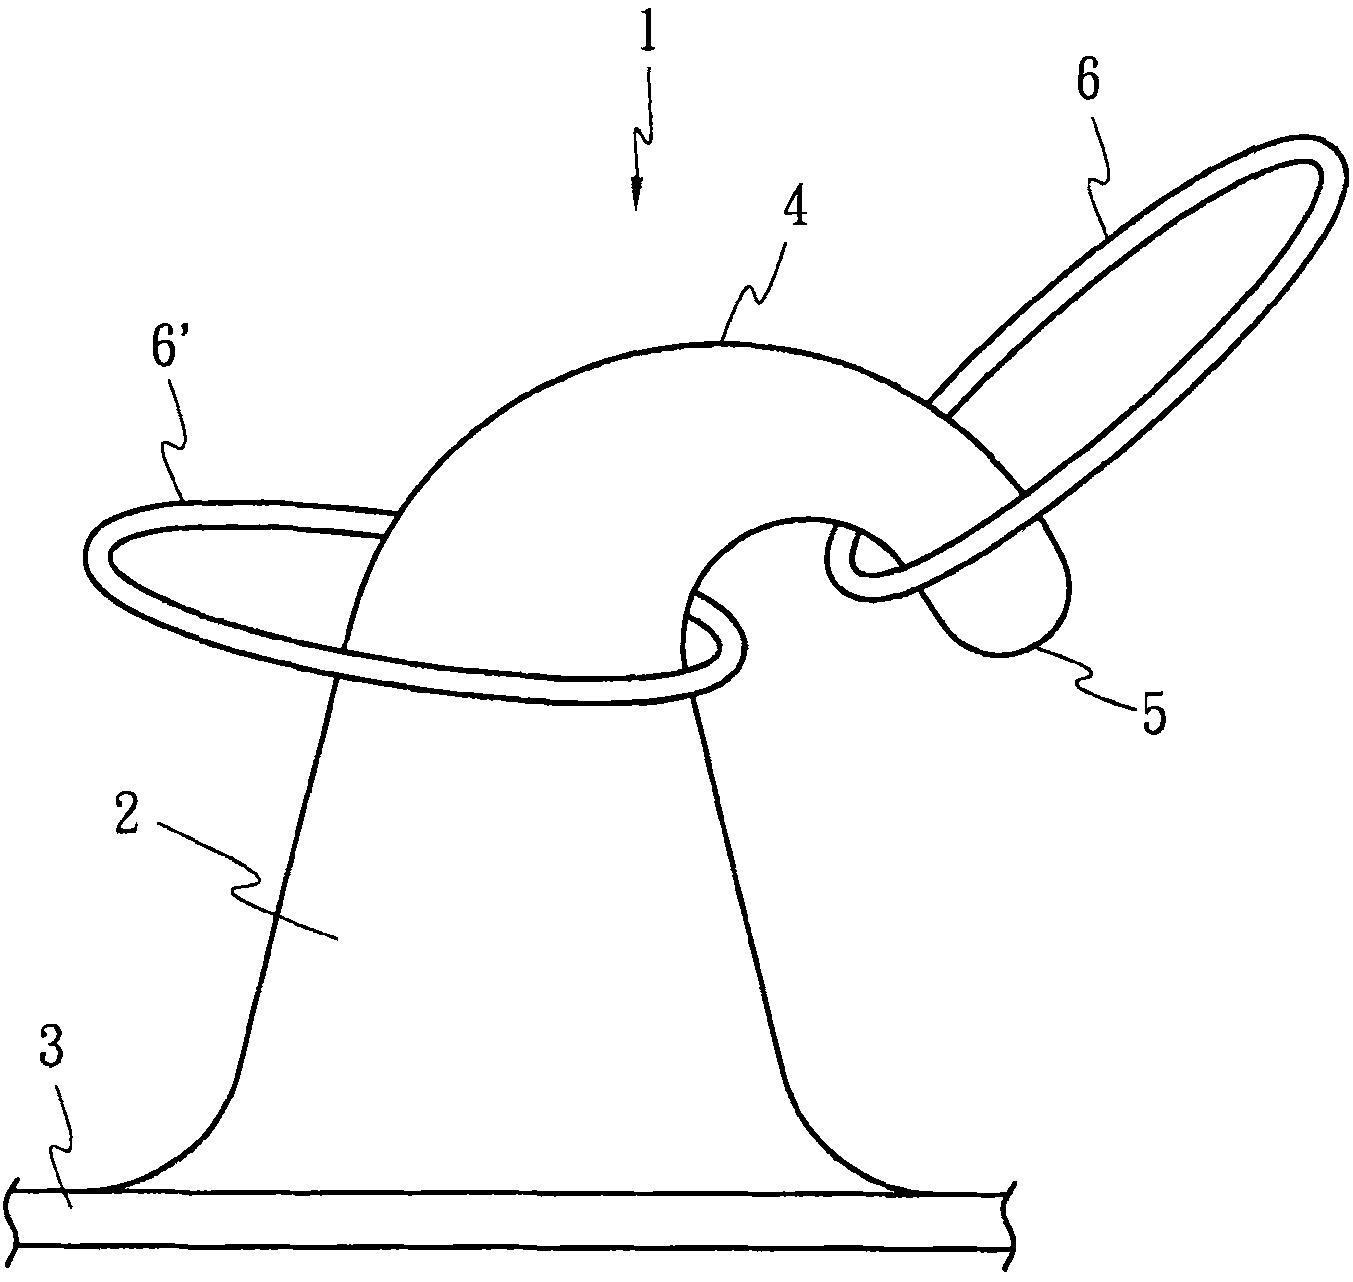 Jet hook structure of velcro tape and velcro tape containing same